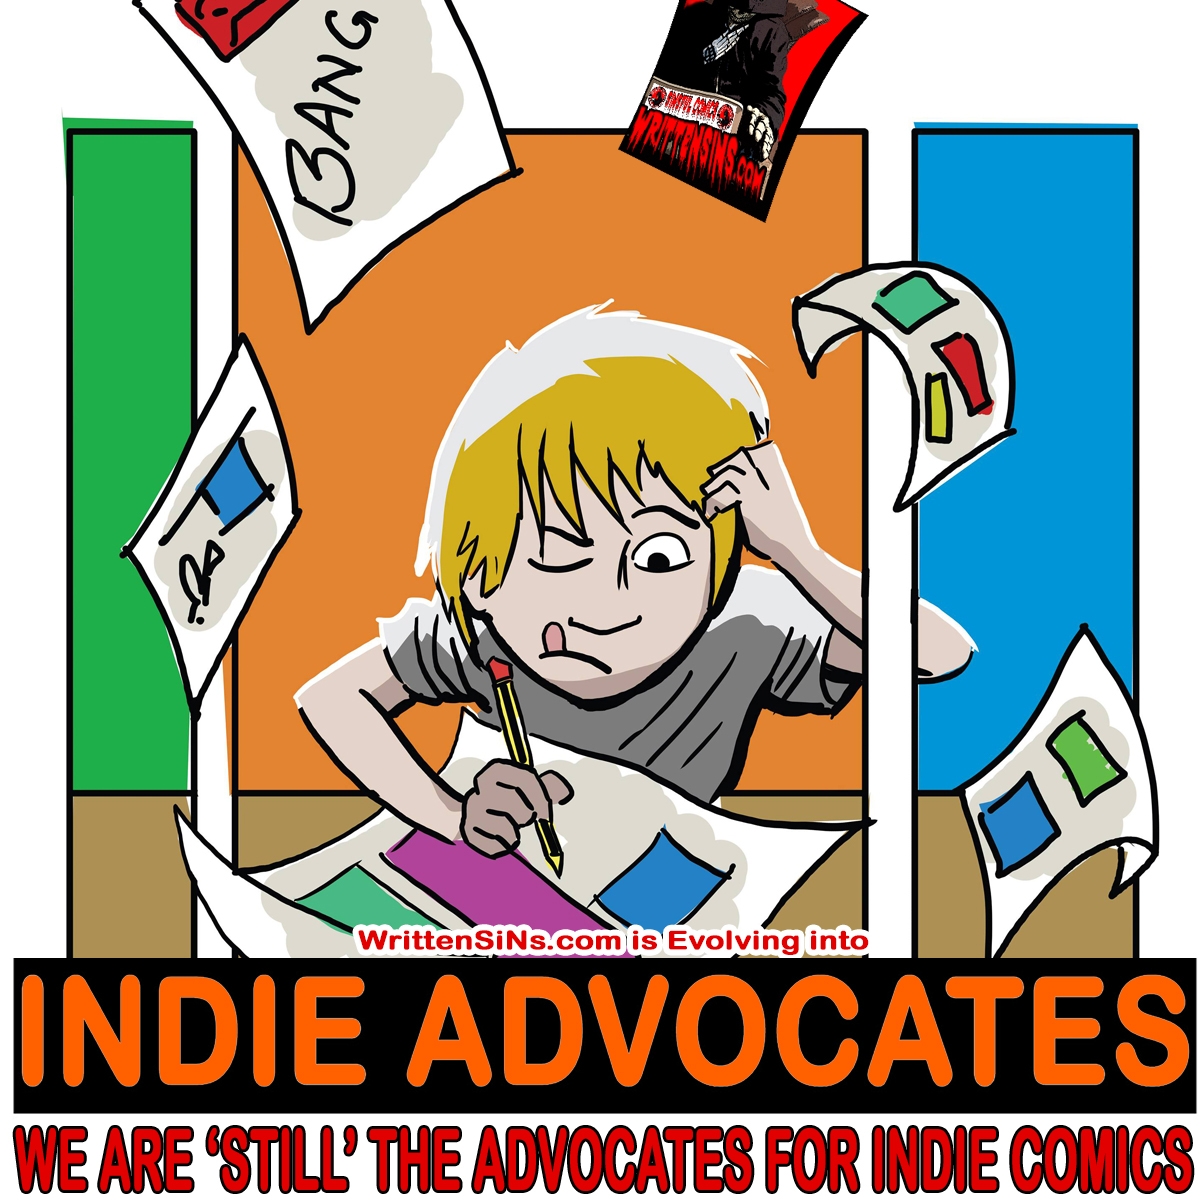 ABOUT INDIE ADVOCATES  .